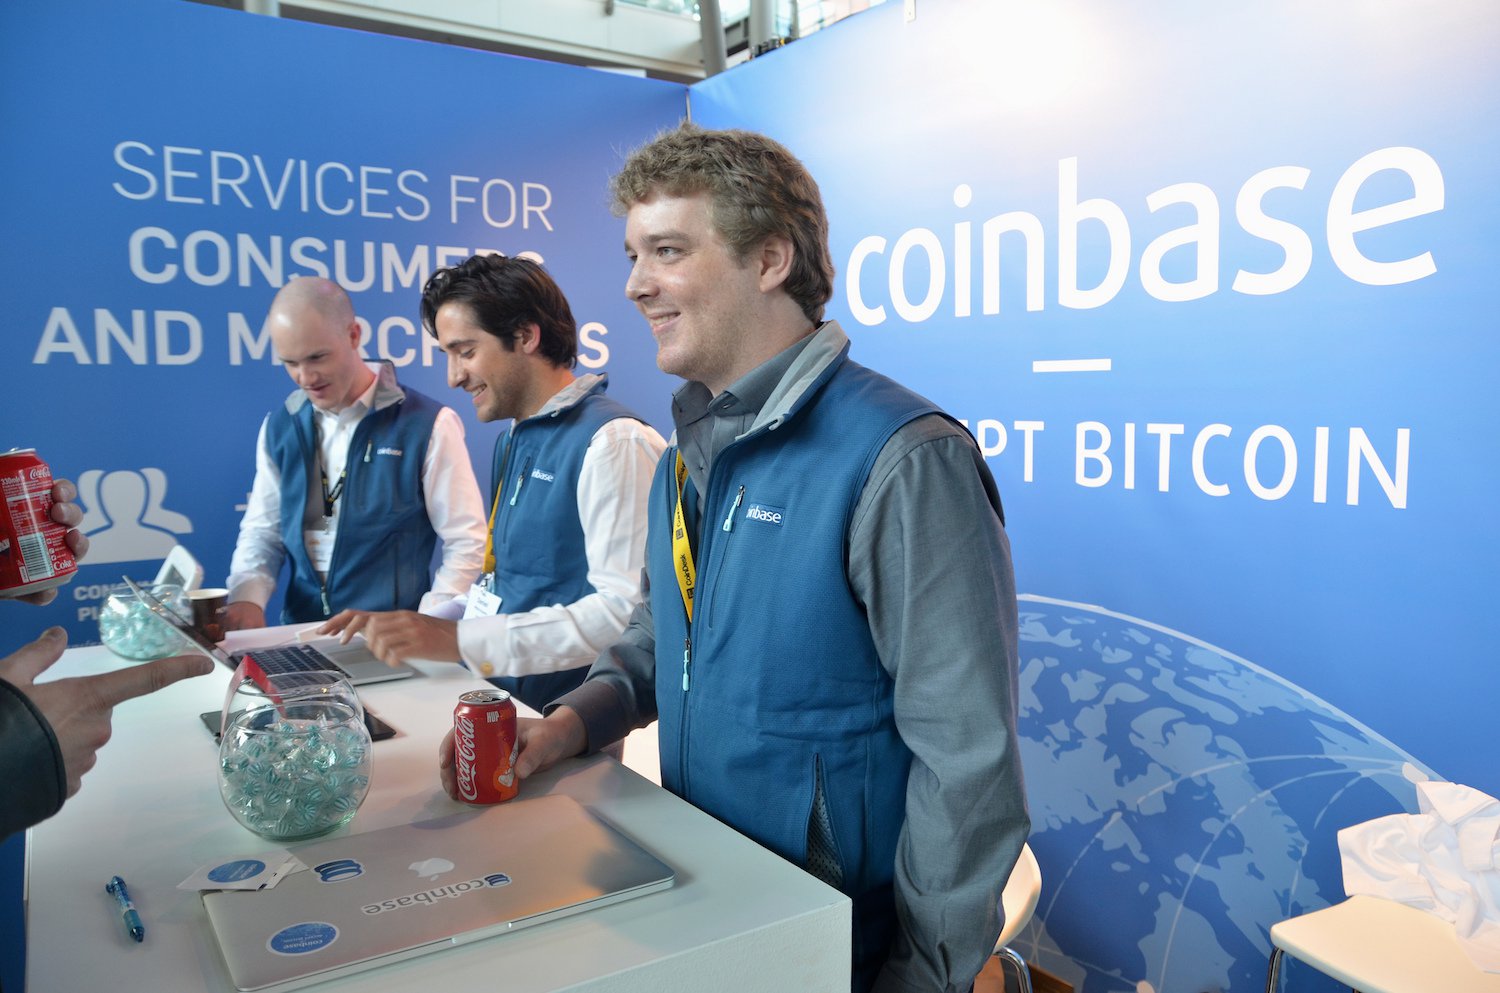 3 Ways Coinbase Could Lose Its Crypto Crown